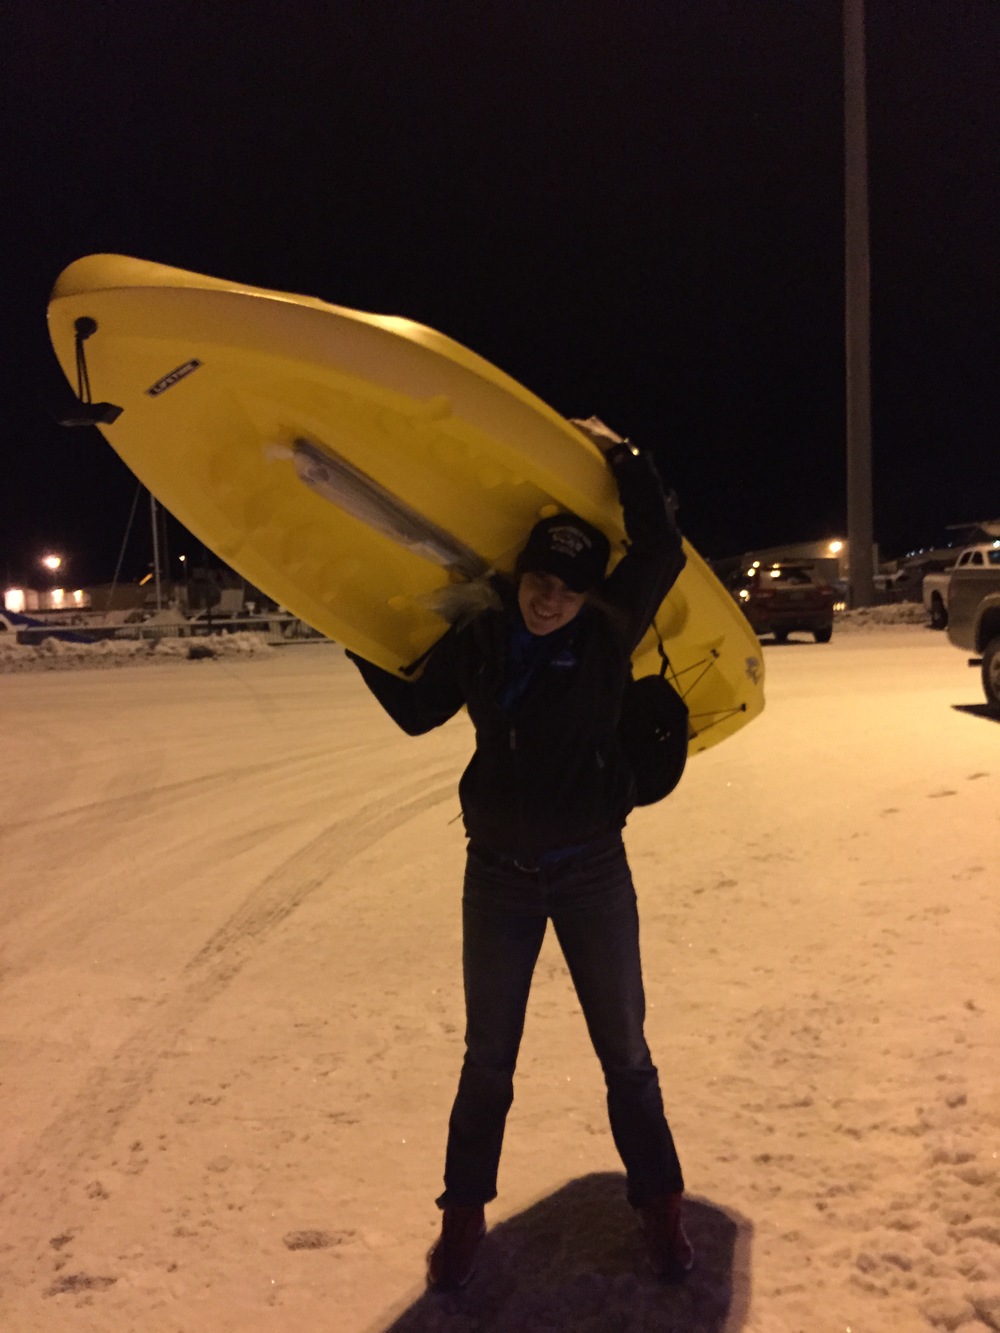 Part 3 of the Qaniq Challenge, walking the kayak home from the banquet!